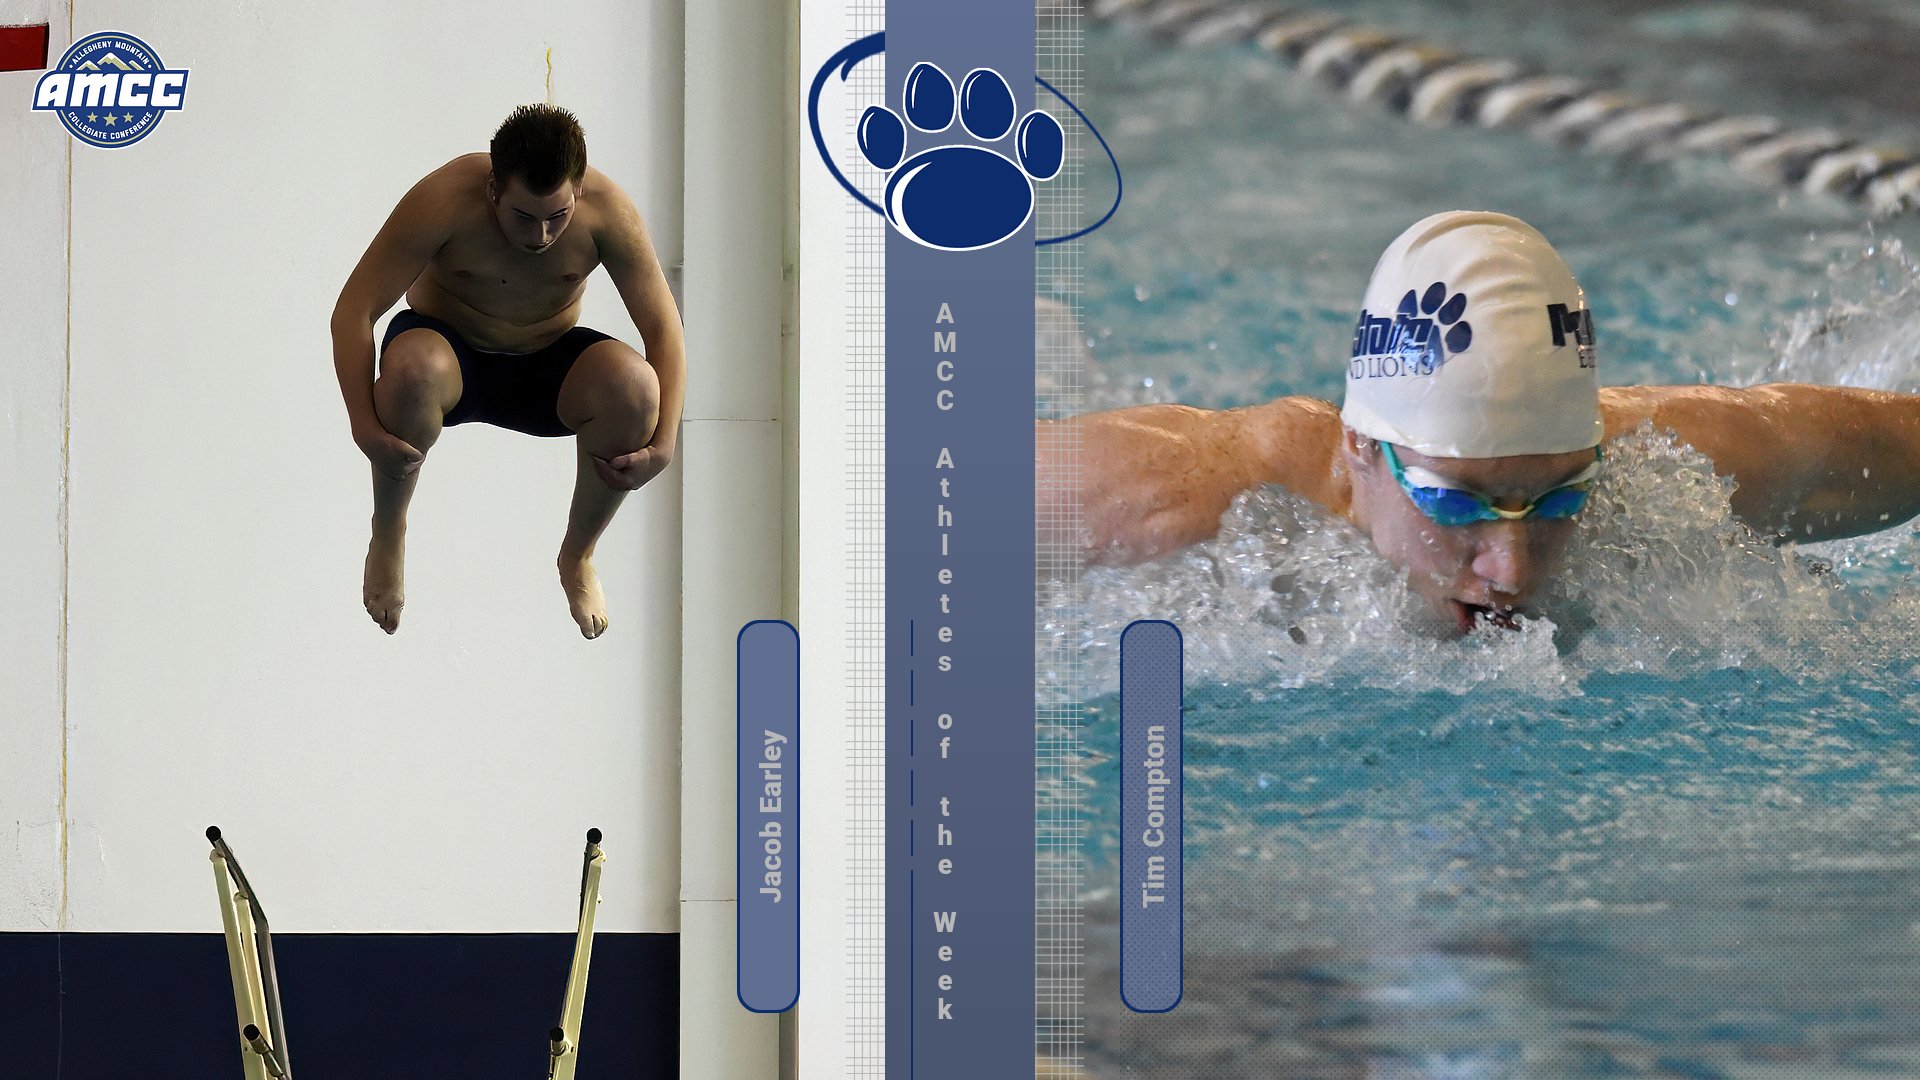 Compton, Earley Named AMCC Athletes of the Week